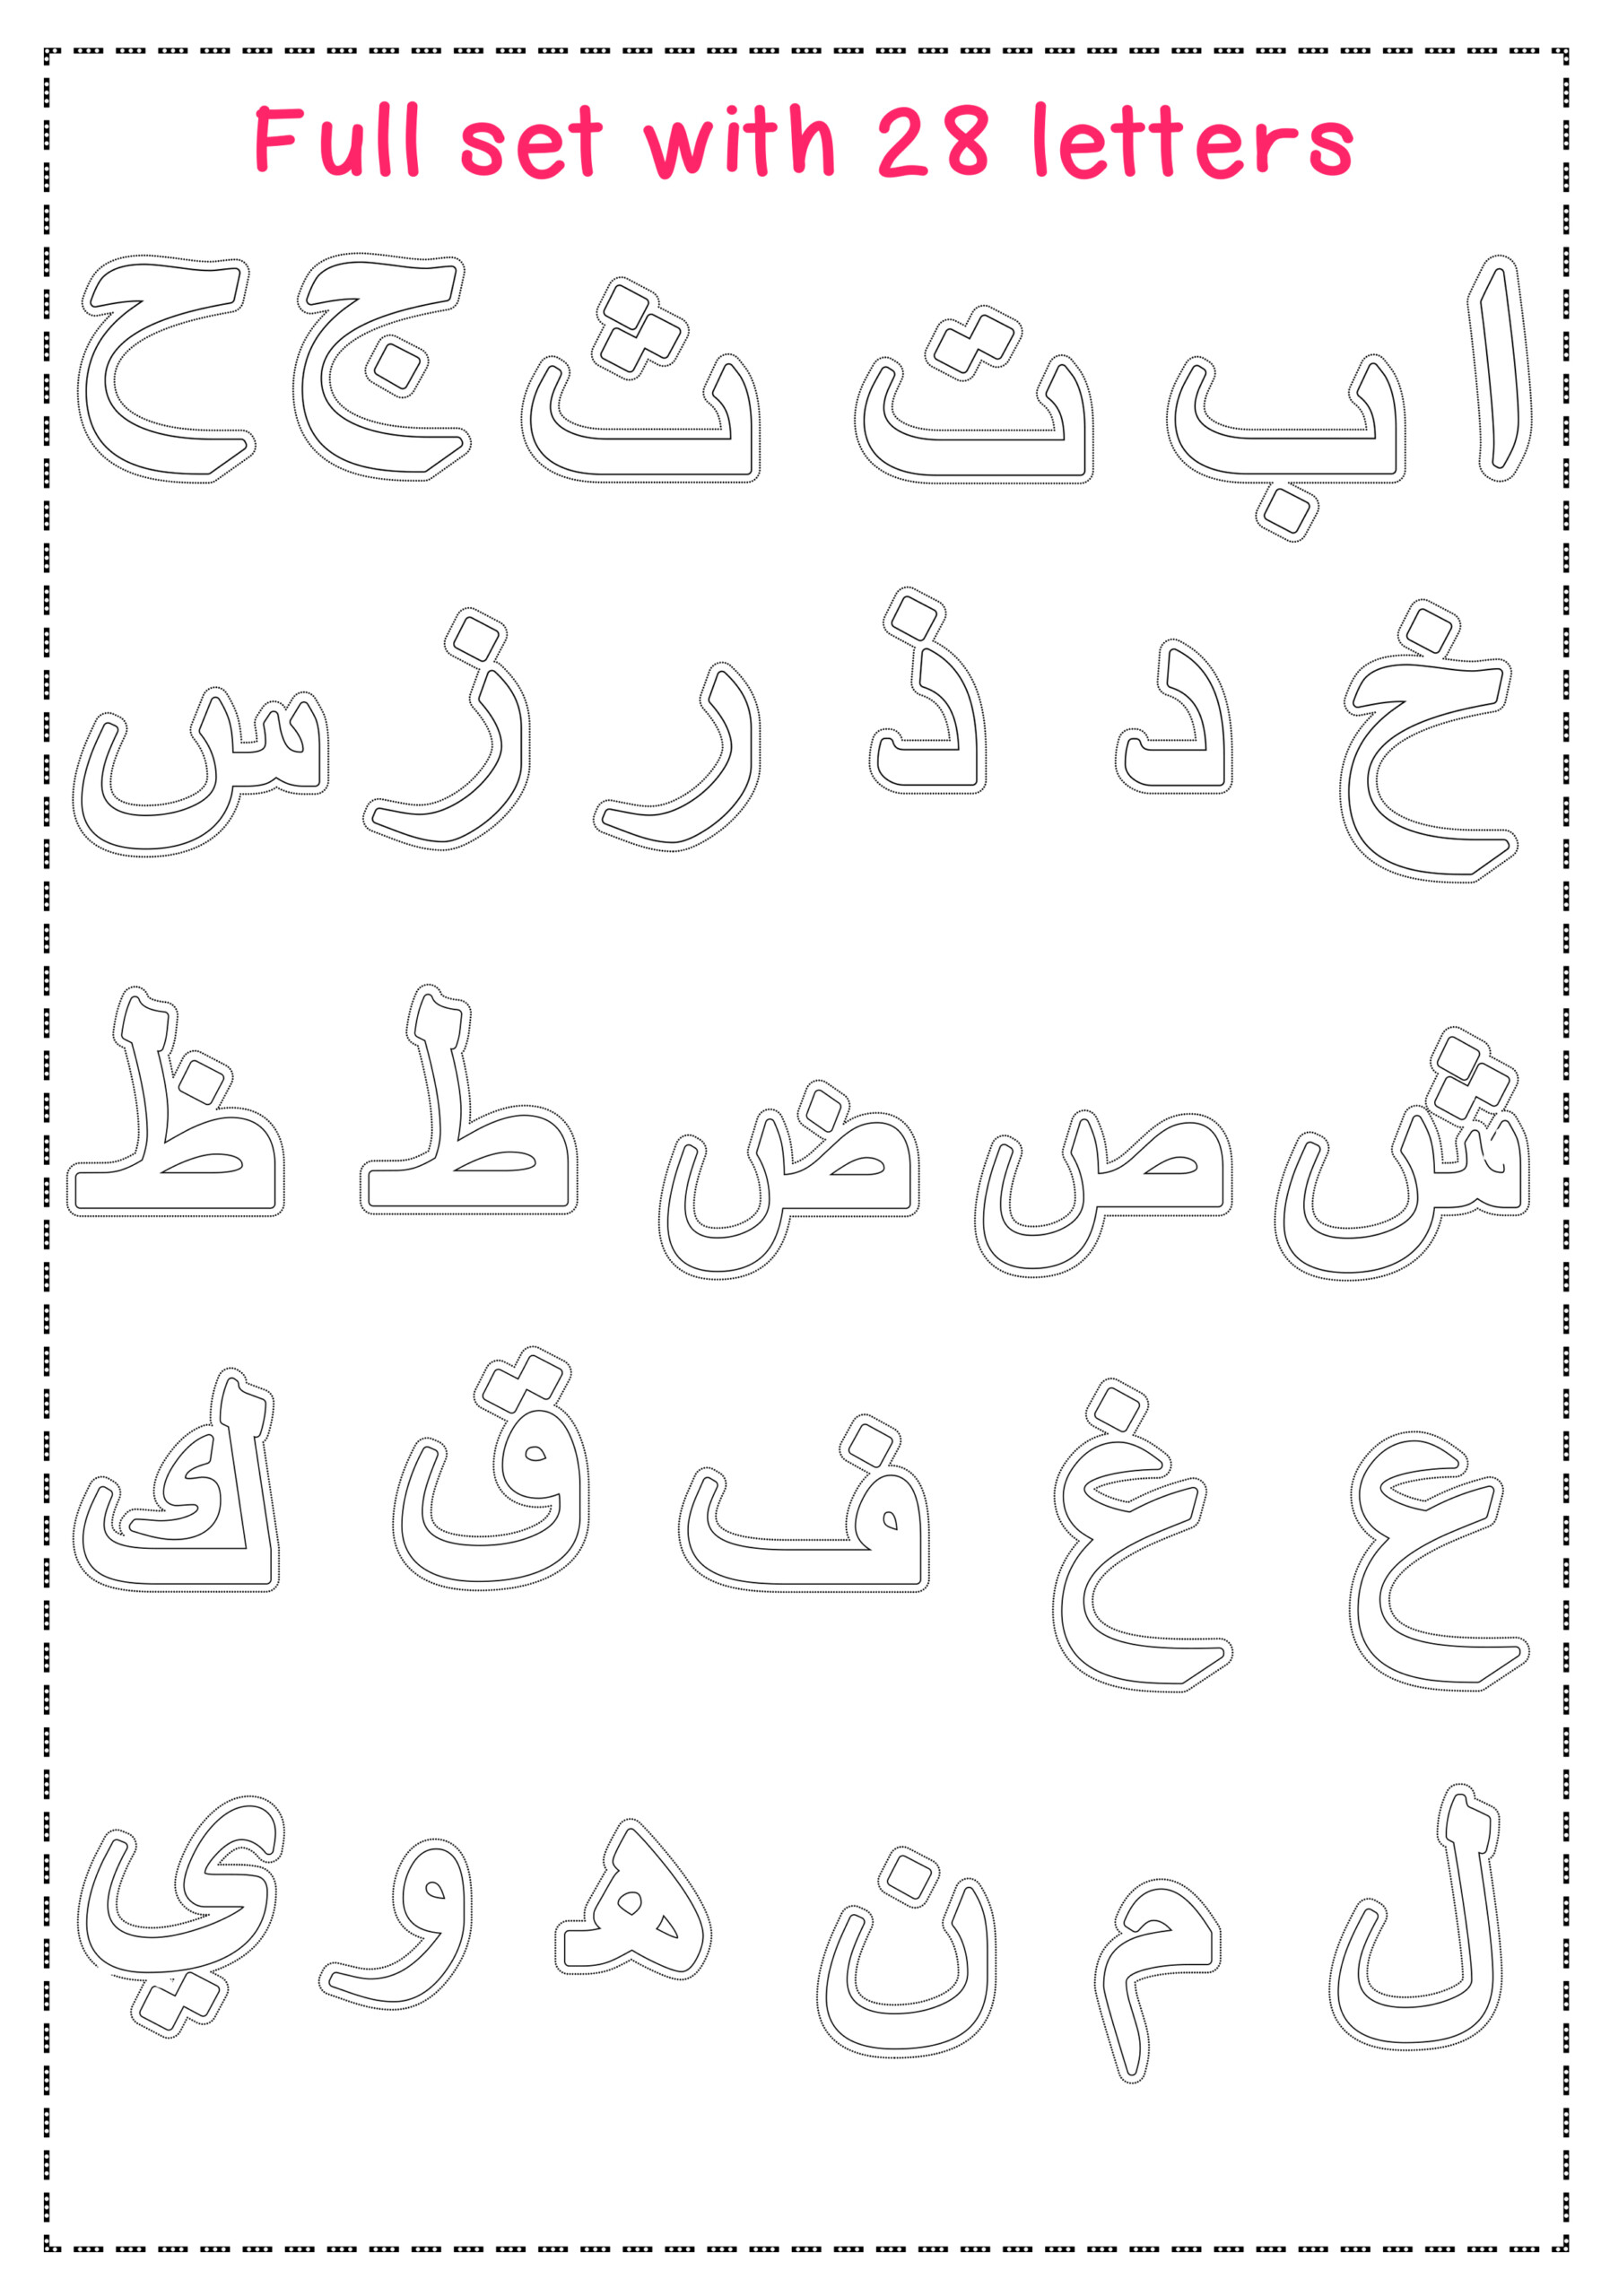 Arabic Alphabet Letters Colouring, Cut, Paste, Tracing Activities Clipart inside Tracing Arabic Letters